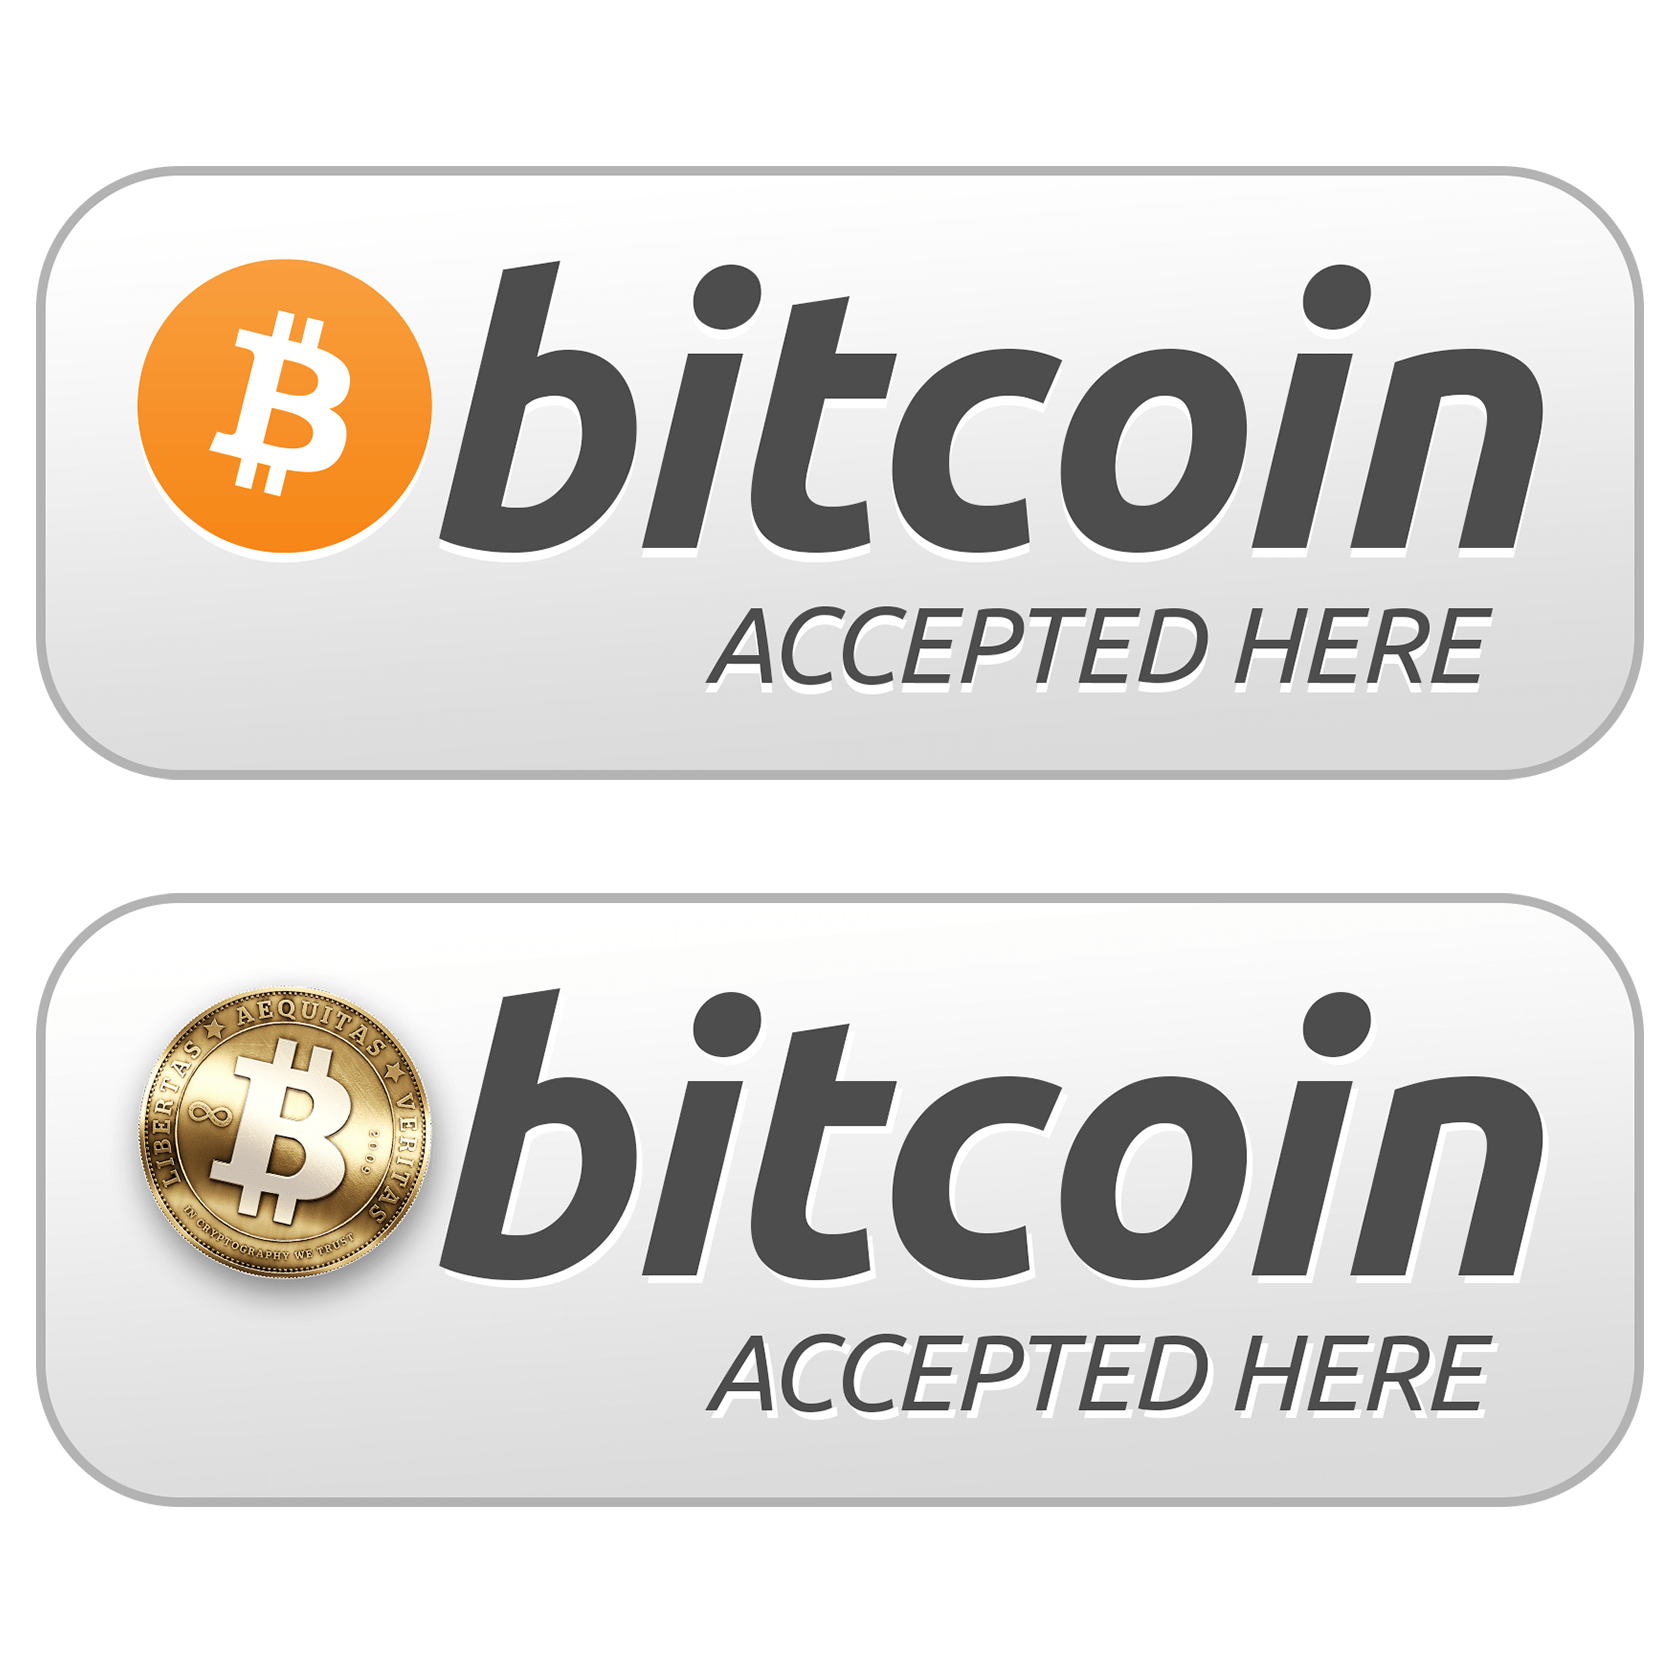 bitcoins accepted here